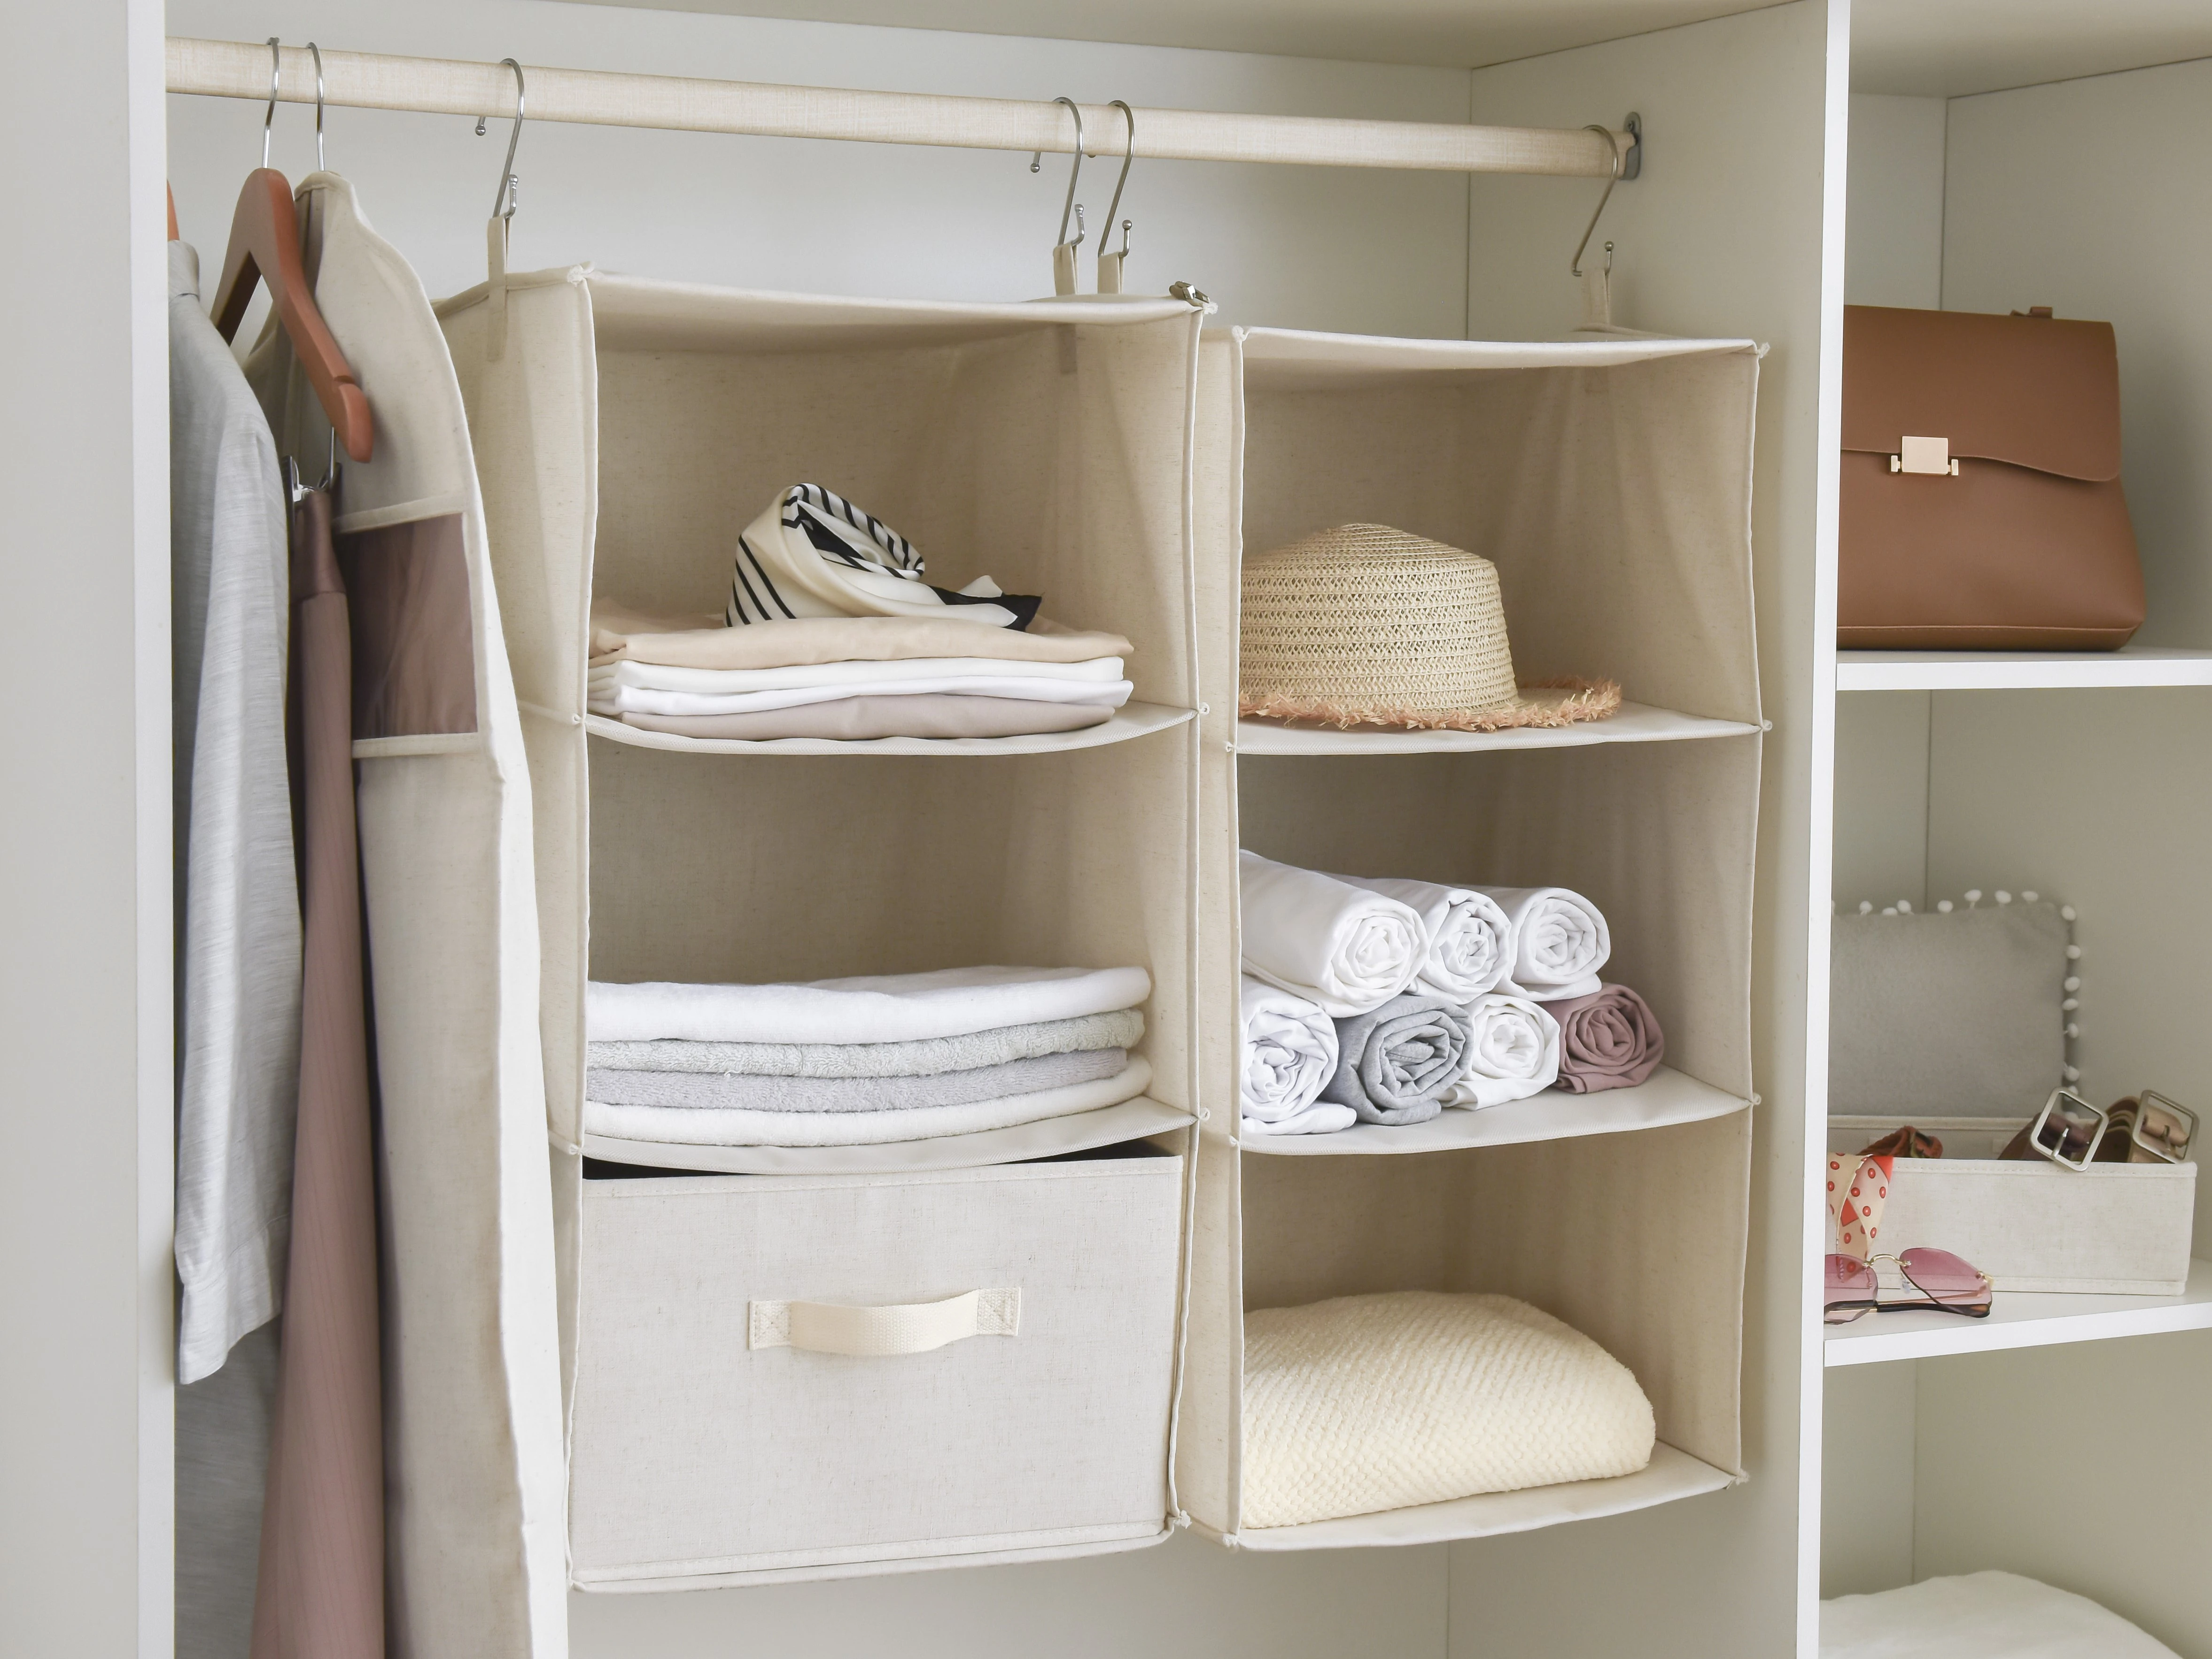 Different Types of Closet Shelves for Hanging Clothes: Which Is Best for Hanging Clothes?